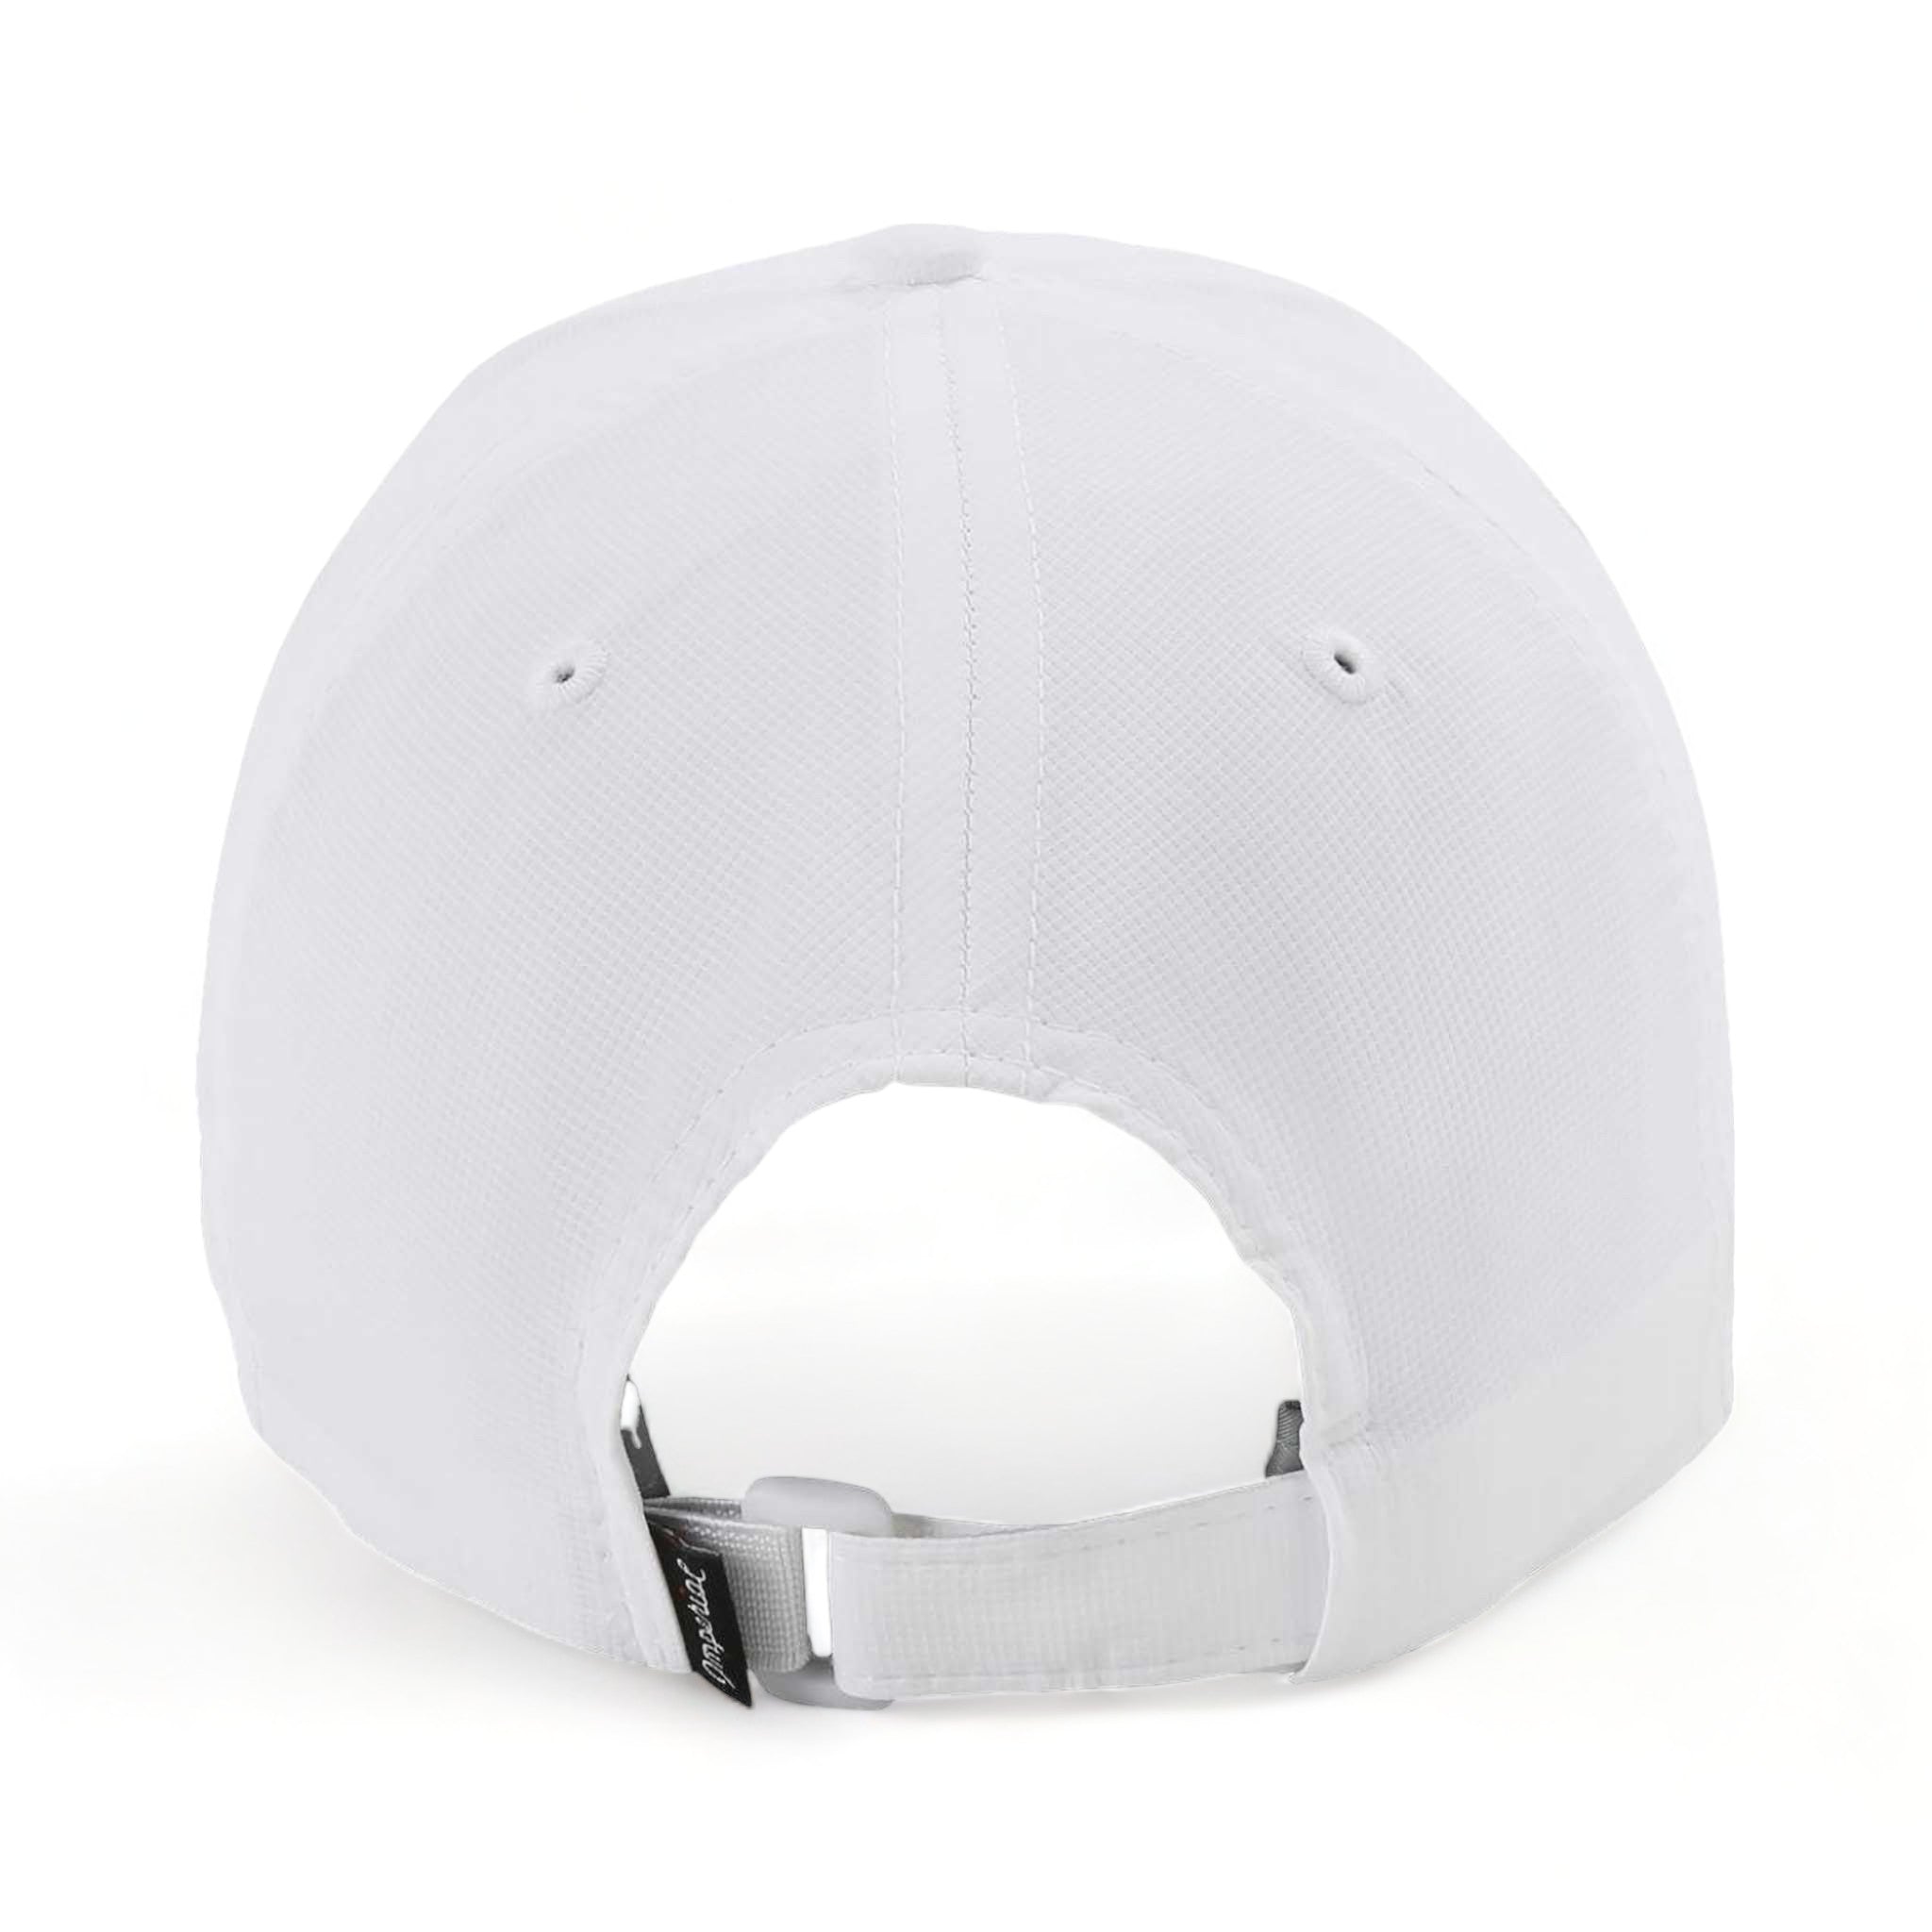 Back view of Imperial X210P custom hat in white